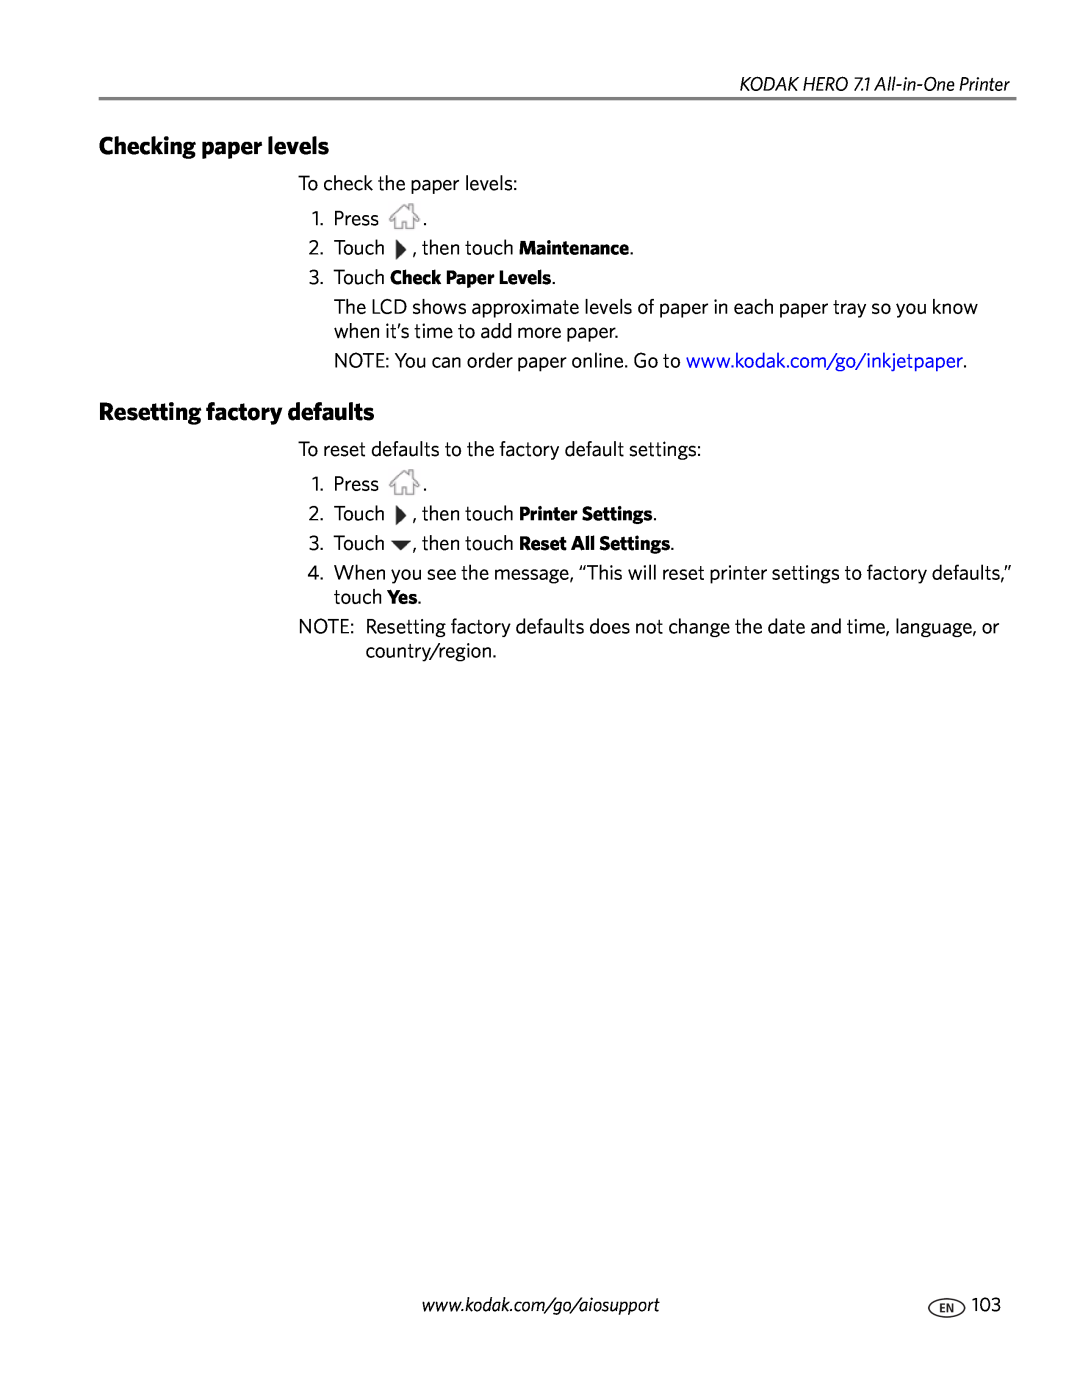 Kodak 7.1 manual Checking paper levels, Resetting factory defaults, Touch Check Paper Levels 